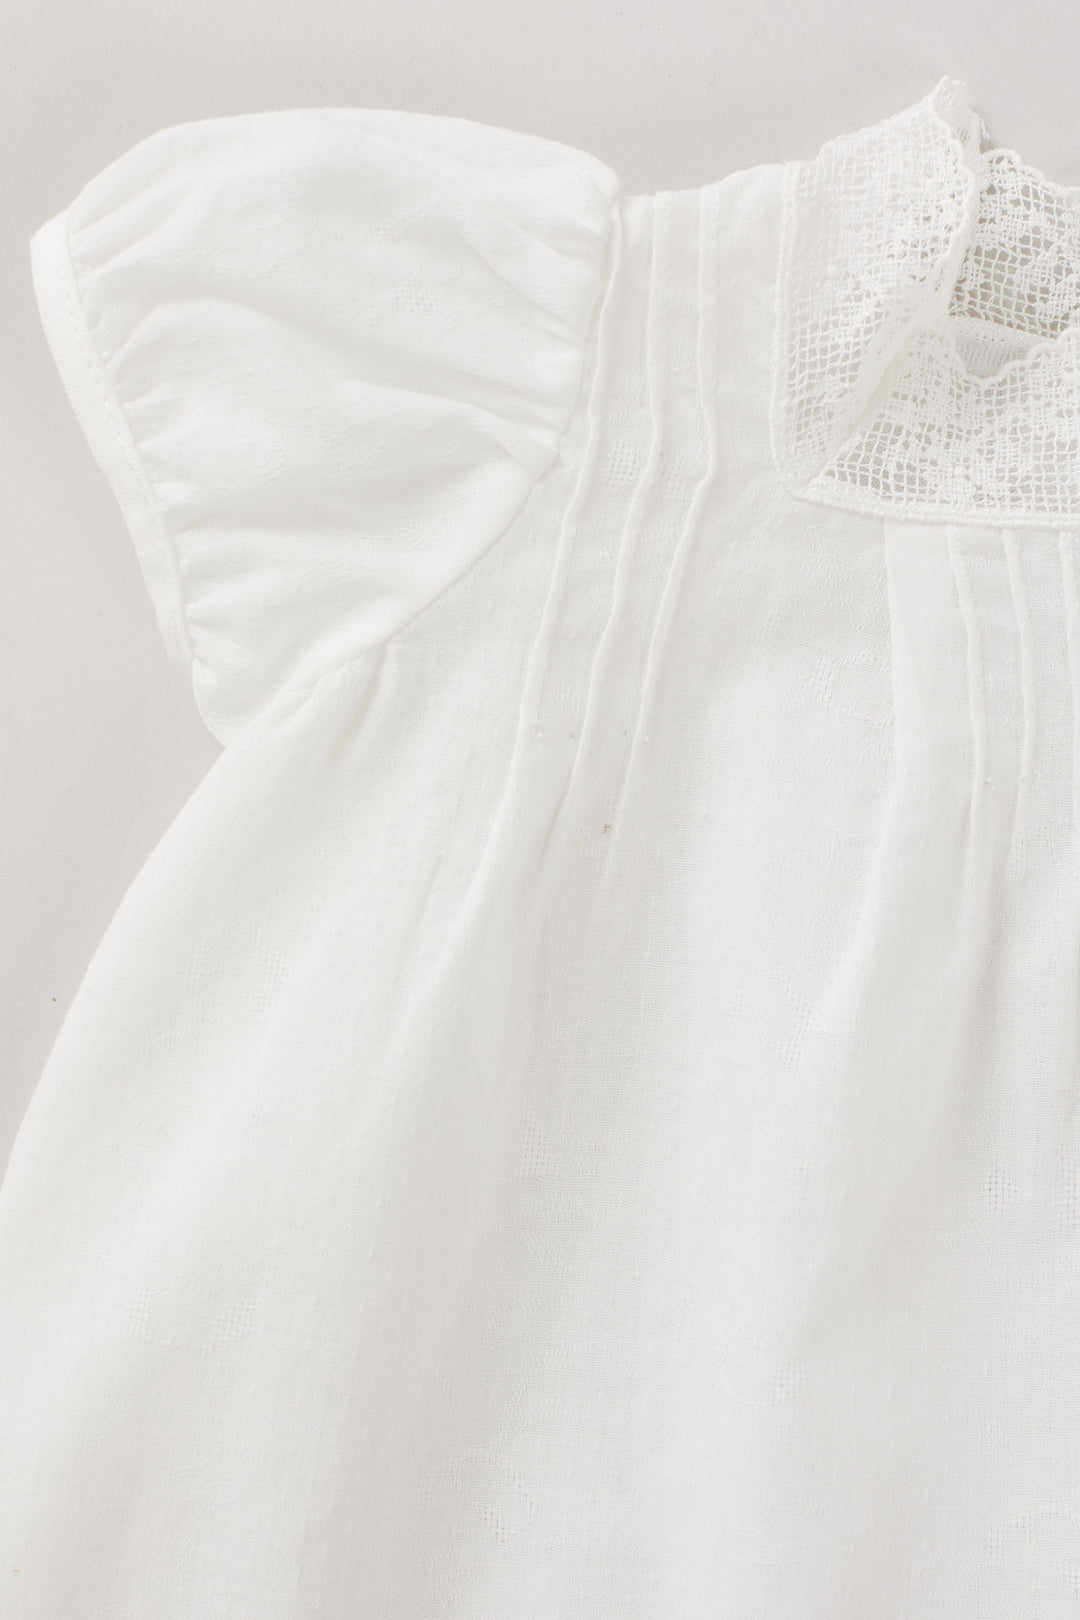 Baby Lullaby Dress In White Jacquard